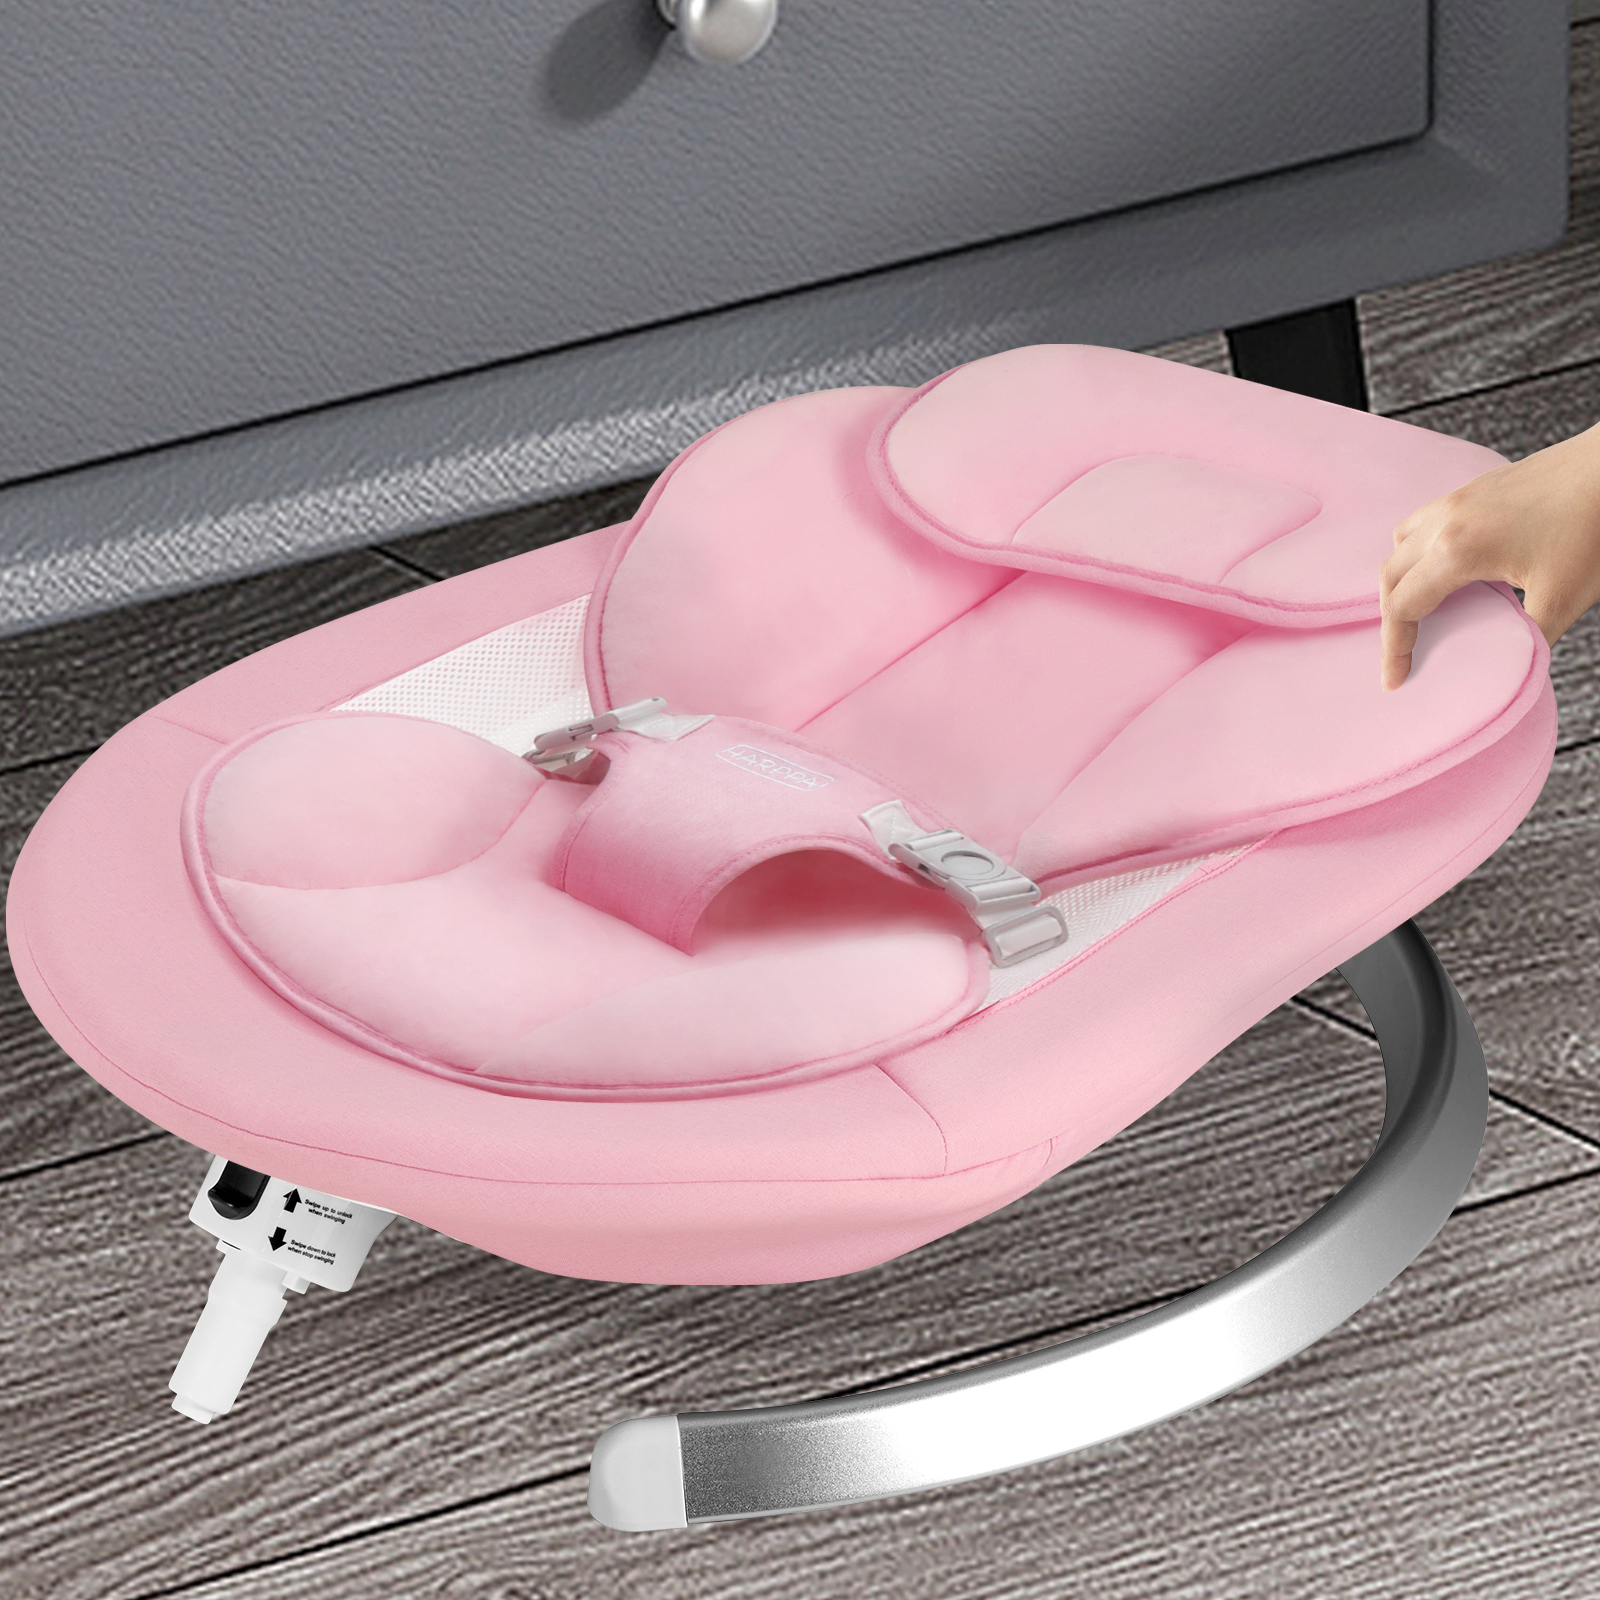 HARPPA Electric Baby Swing, Bluetooth Speaker, Remote Control, Pink - image 4 of 8